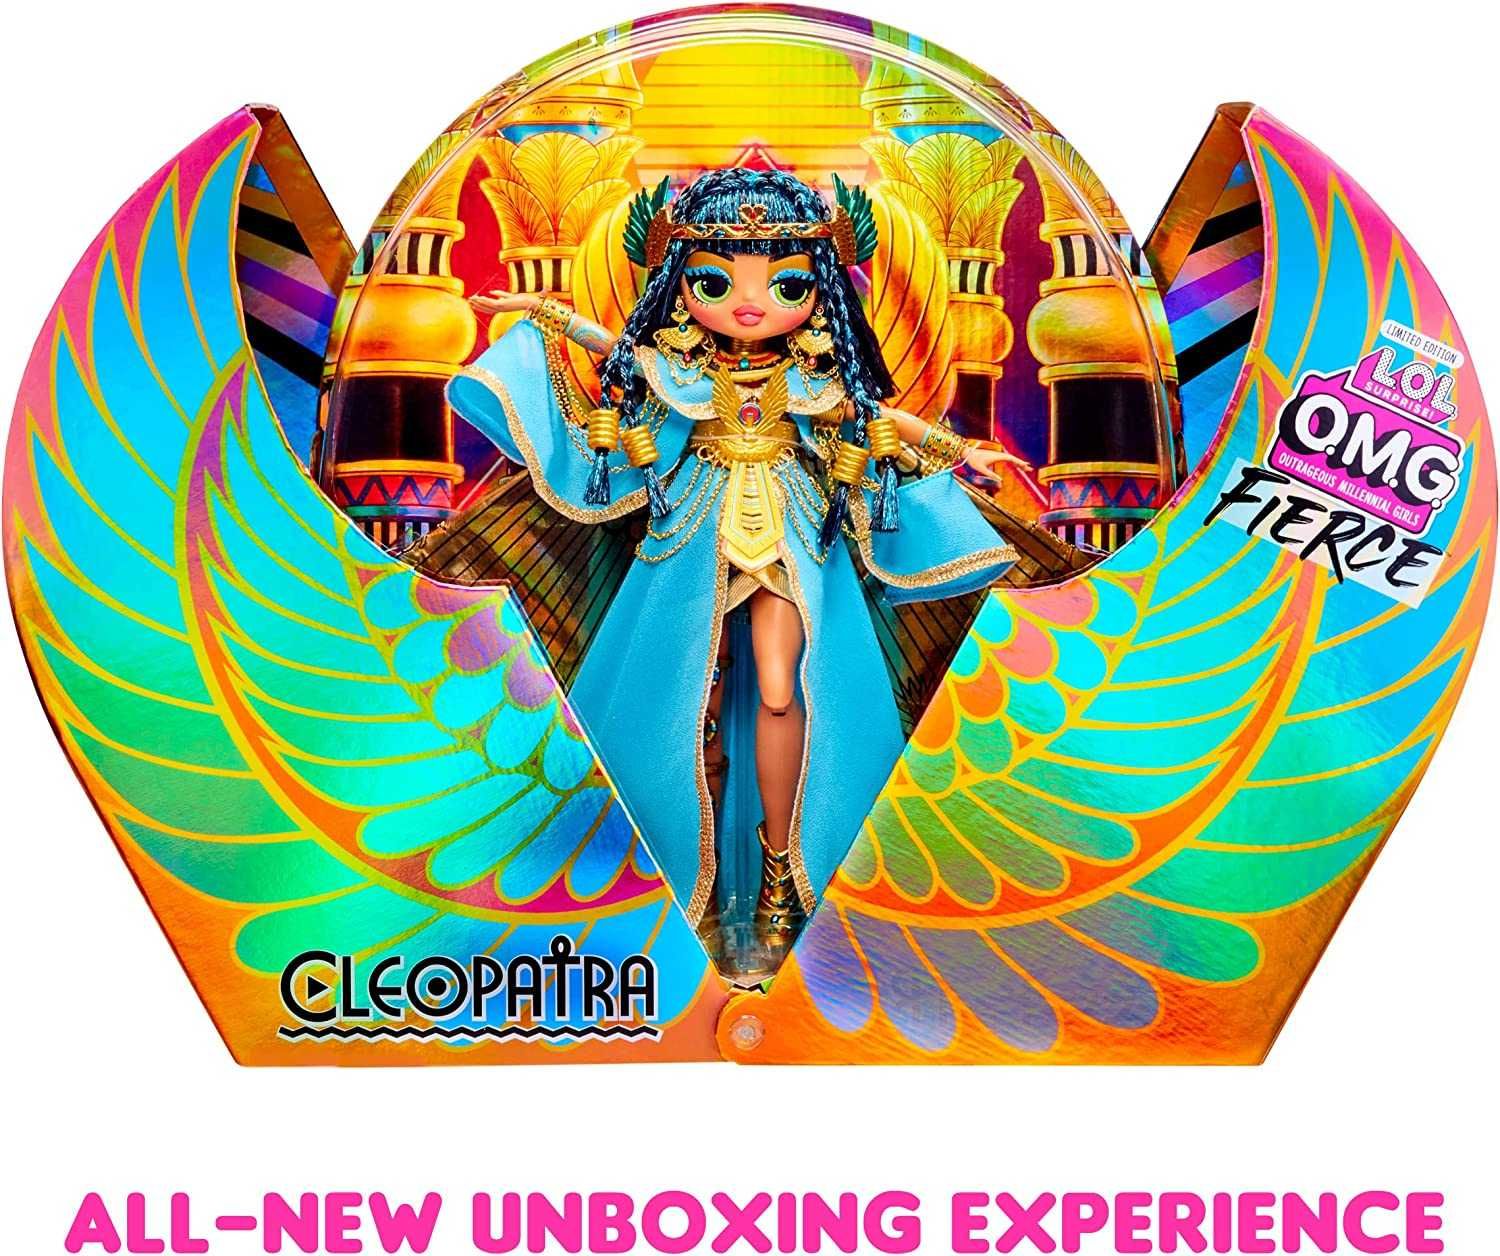 ЛОЛ ОМГ Клеопатра LOL Surprise OMG Fierce Collector Cleopatra